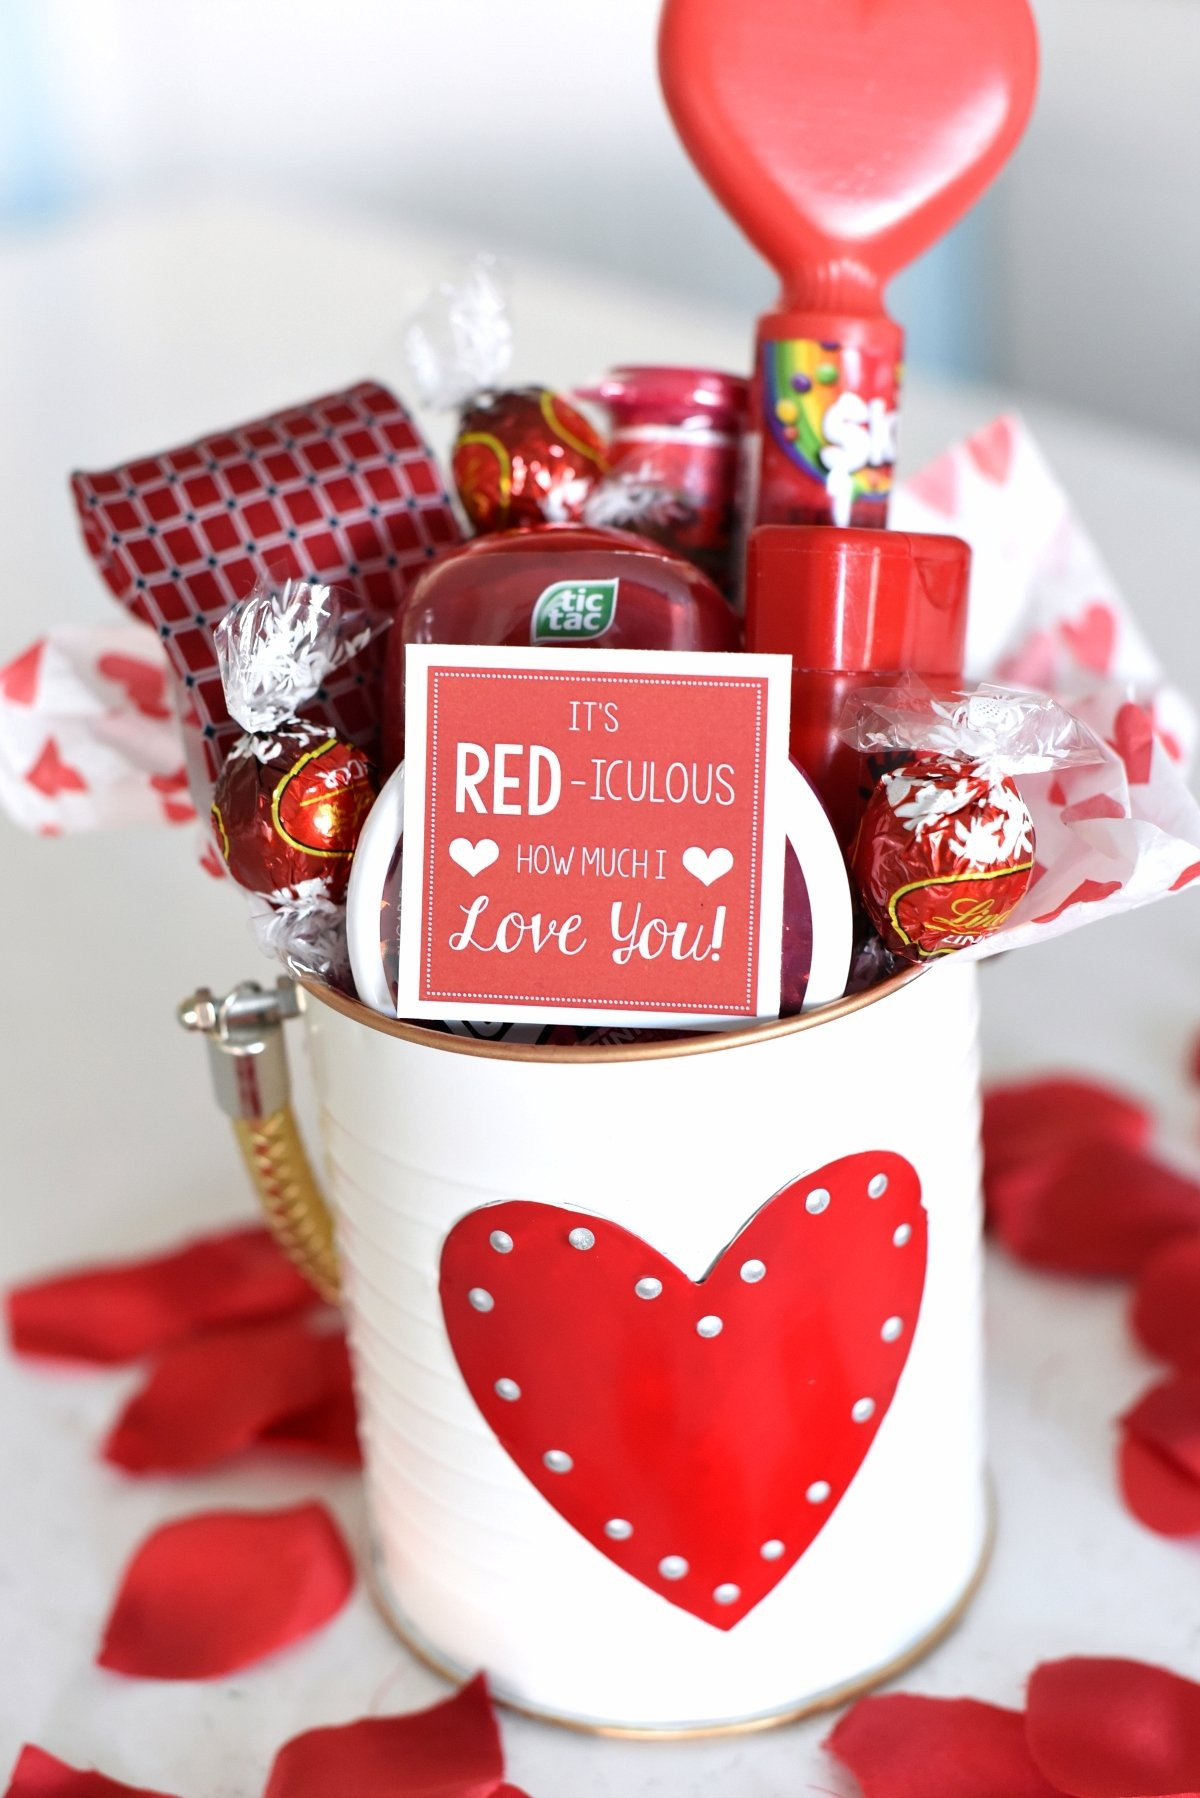 Valentines Day 2020 Gift Ideas Awesome 10 Elegant Valentines Day Gift Ideas for Wife 2020